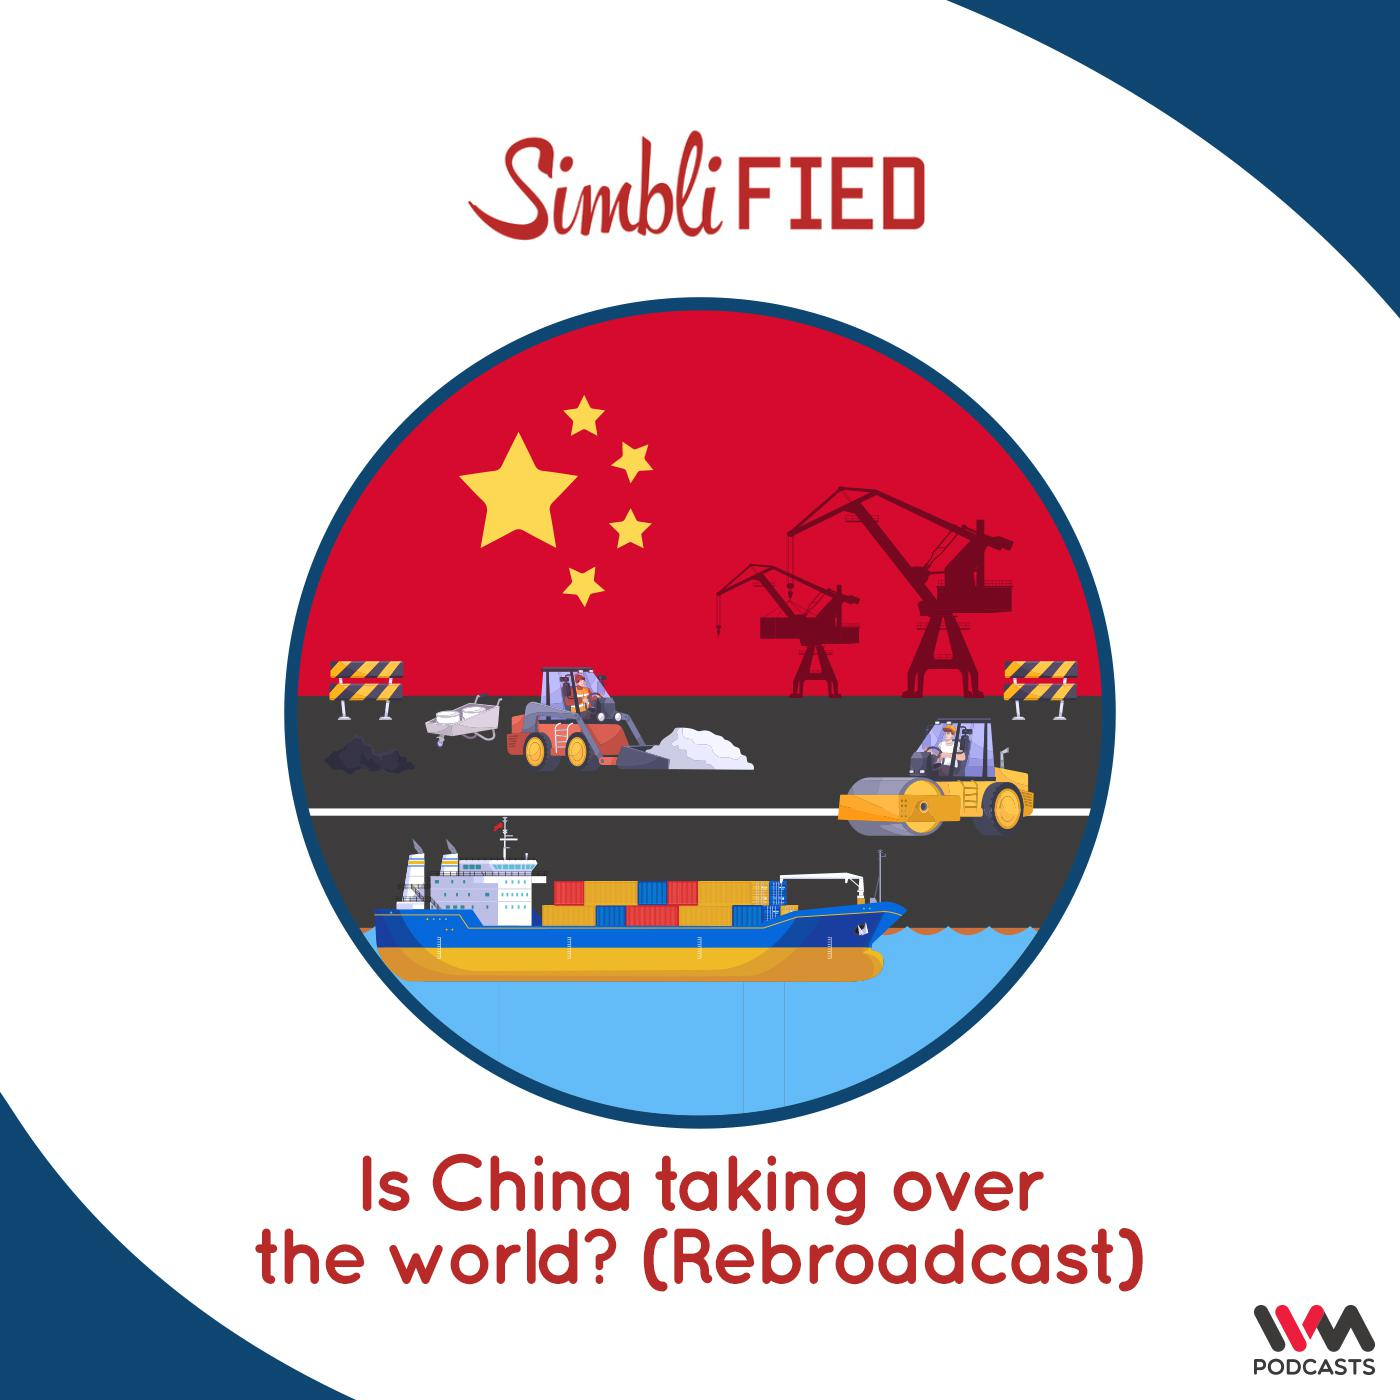 Is China taking over the world? (Rebroadcast)